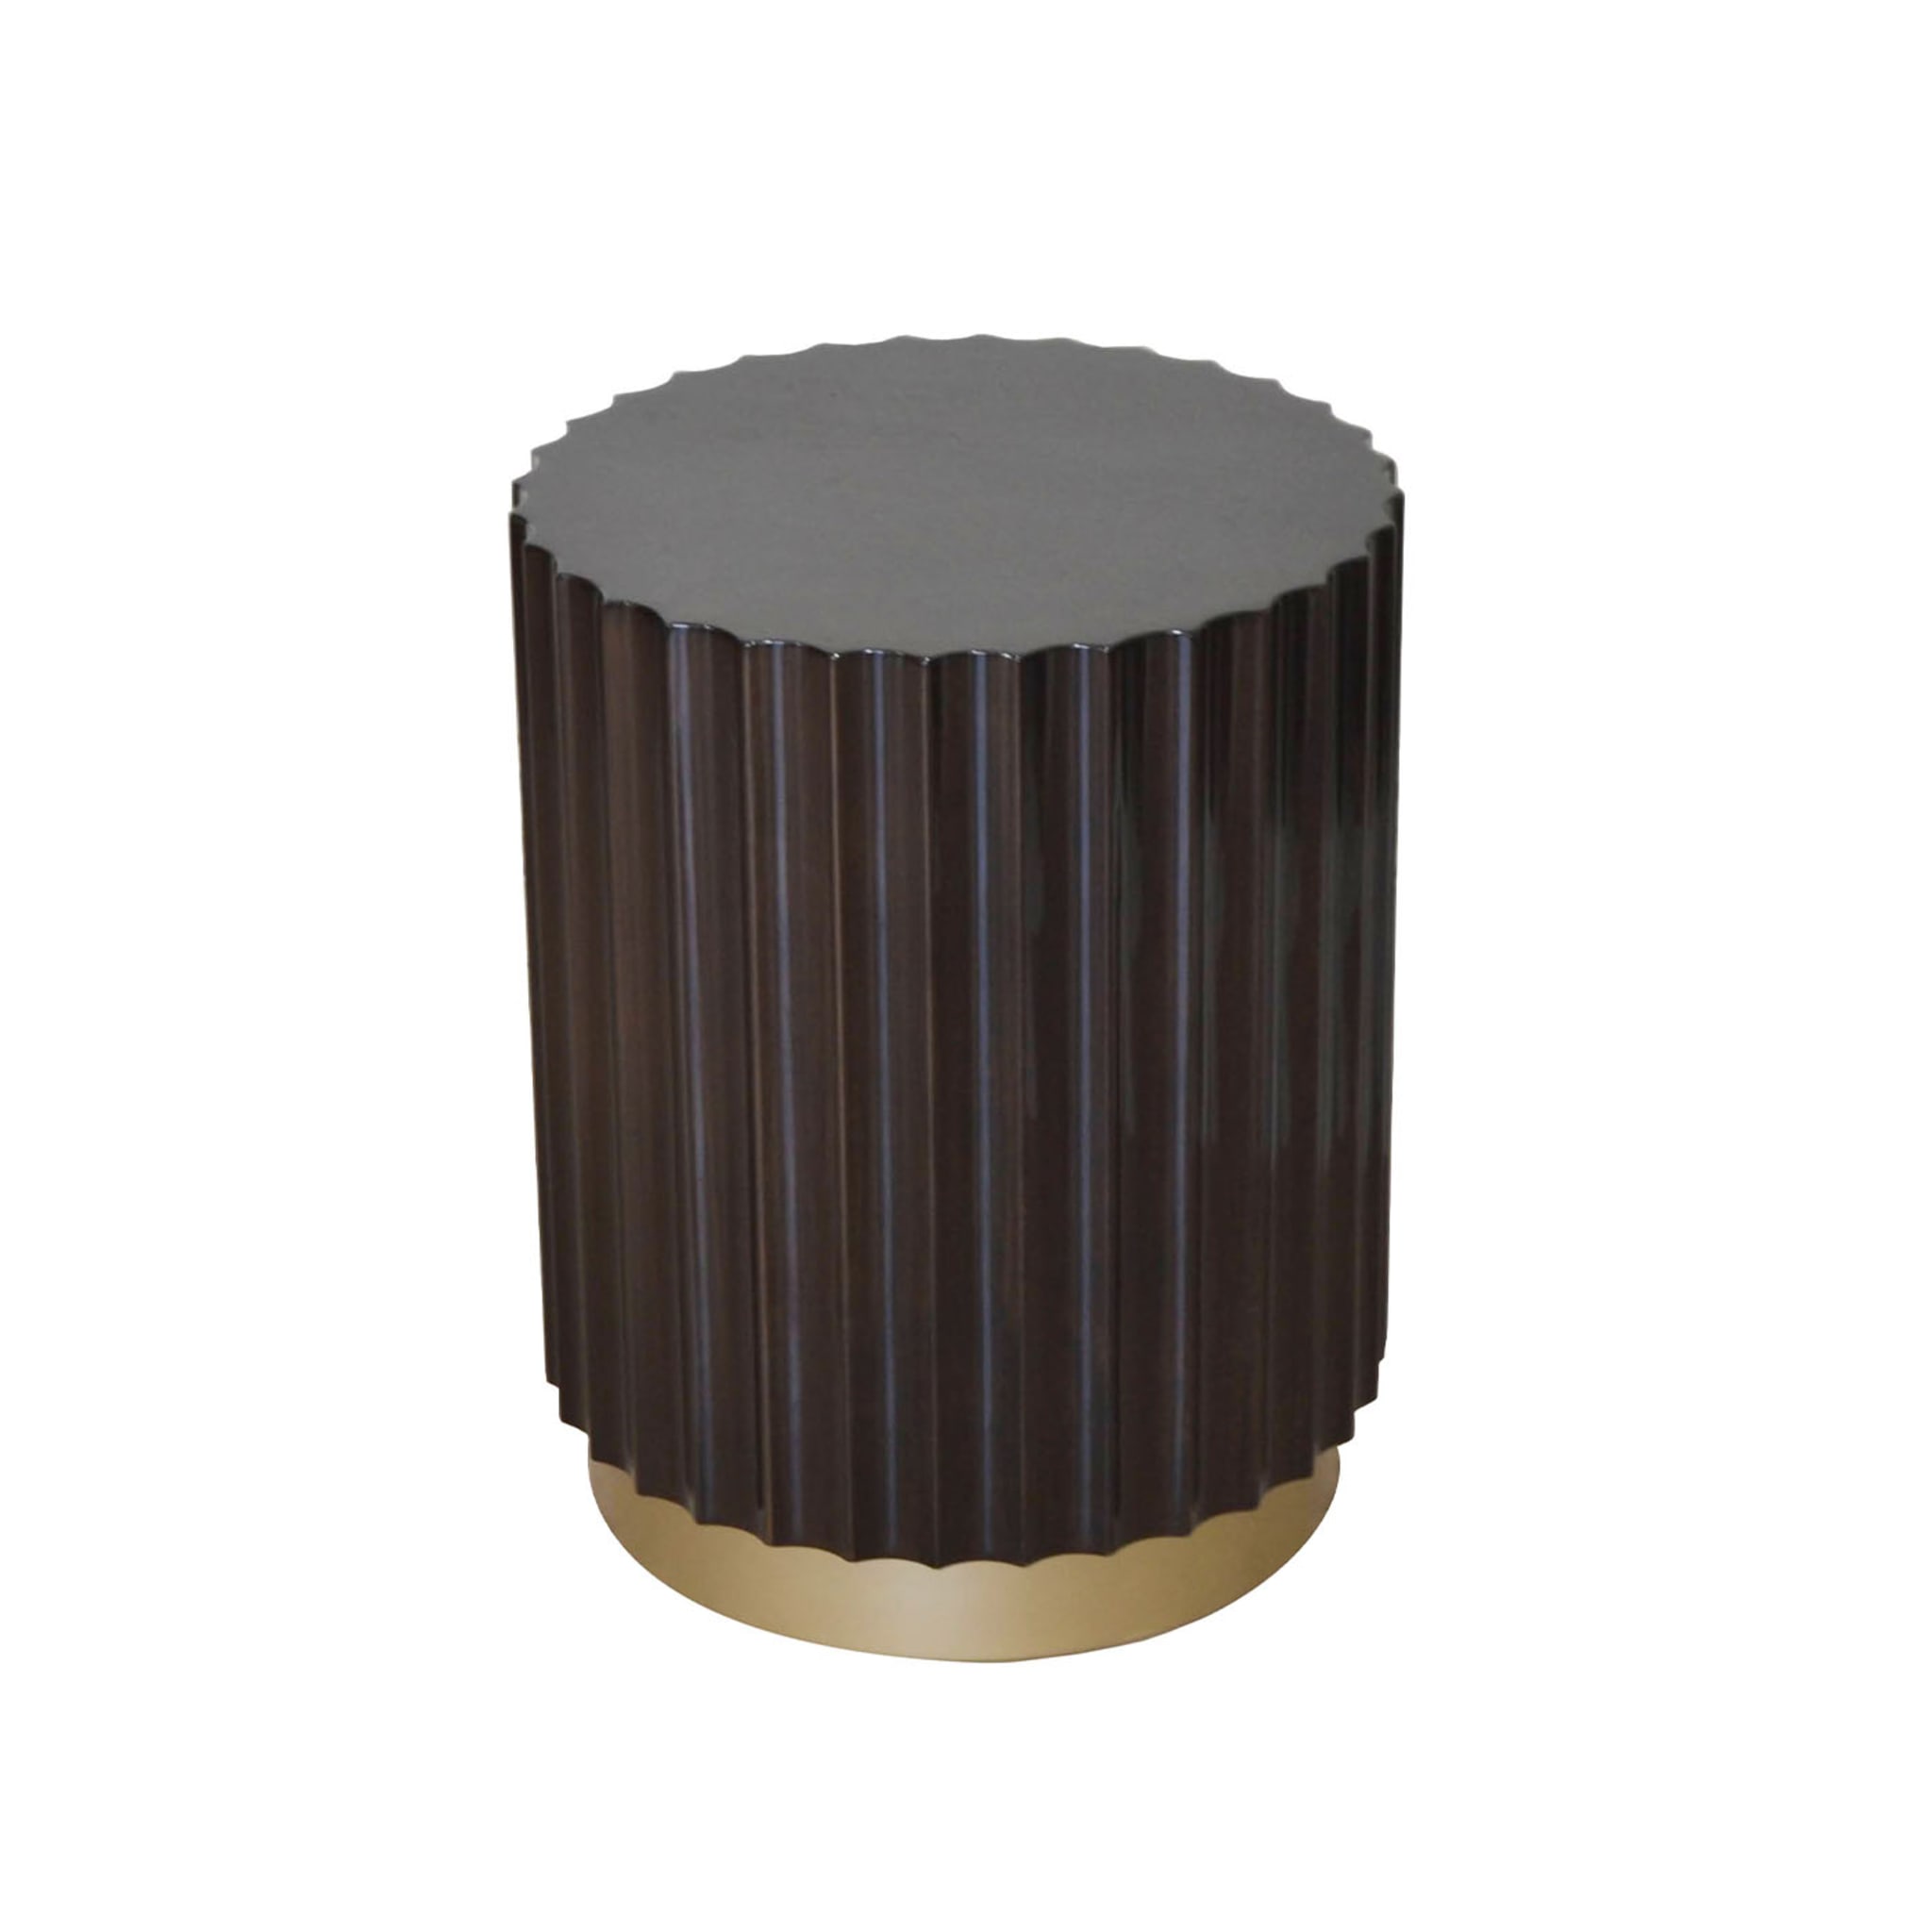 Ebony Brown Coloumn Round Side Table  - Alternative view 1